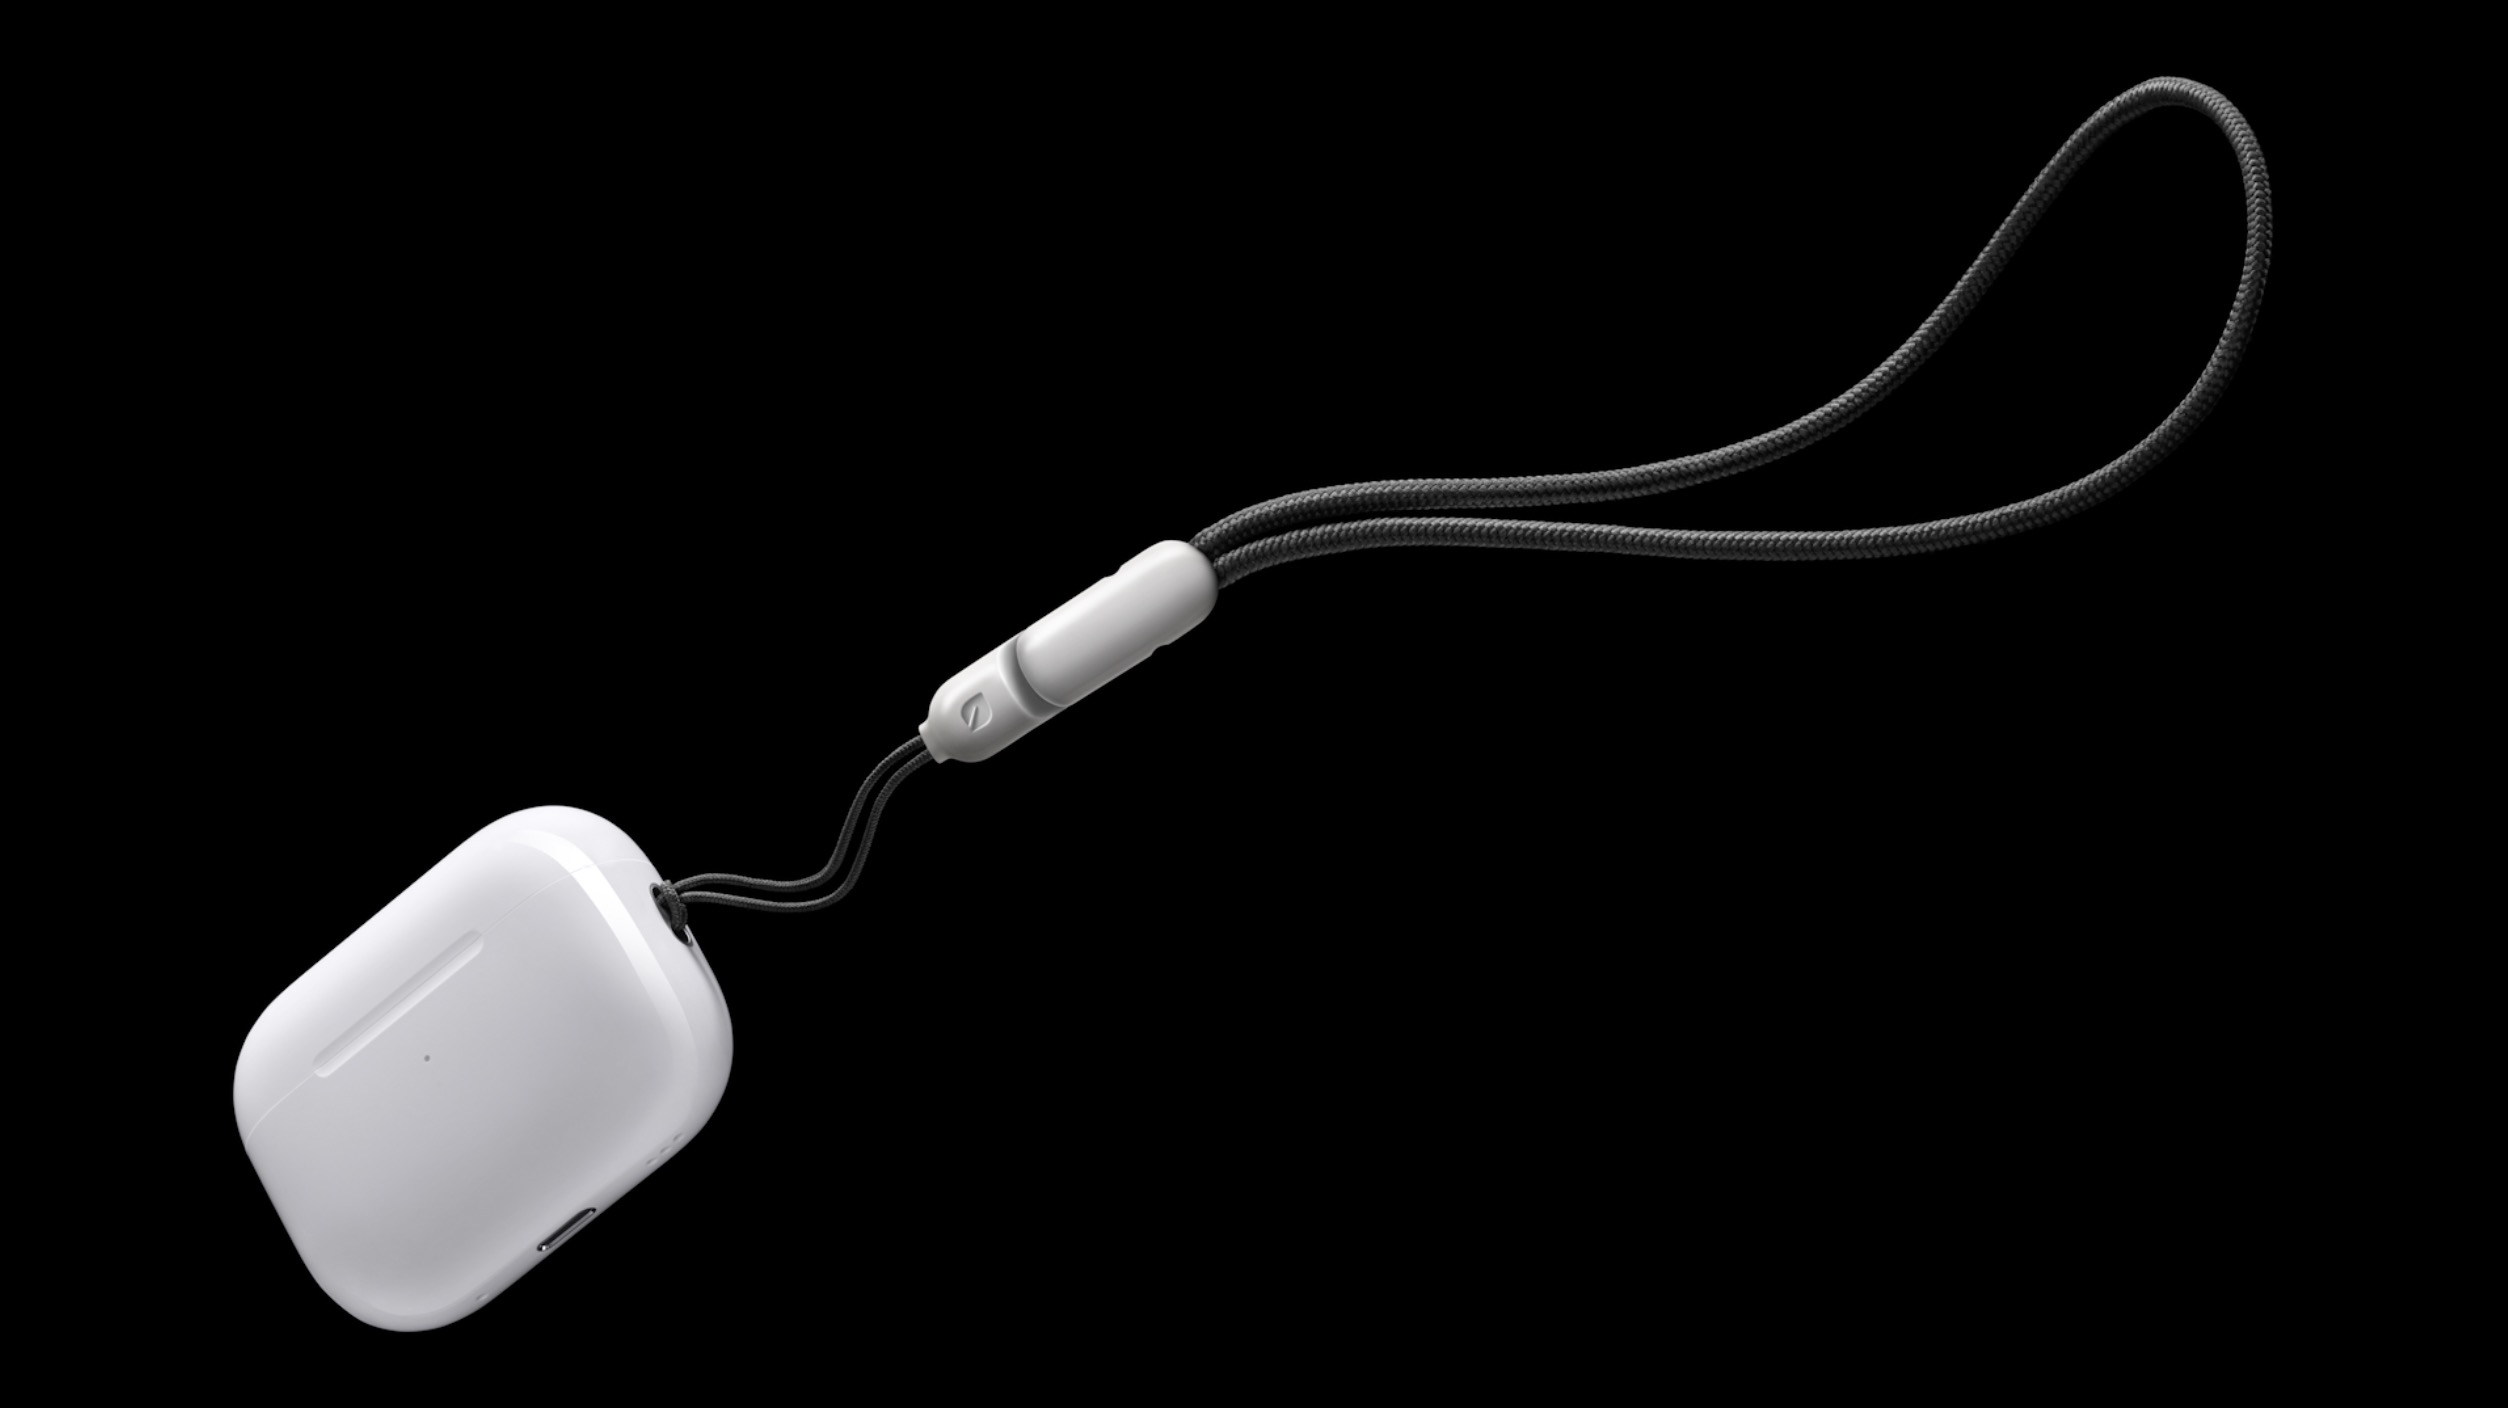 Airpods 2 чип. Air pods Pro 2. Наушники Apple Pro 2. Apple AIRPODS 2. Apple AIRPODS Pro 2 2022.